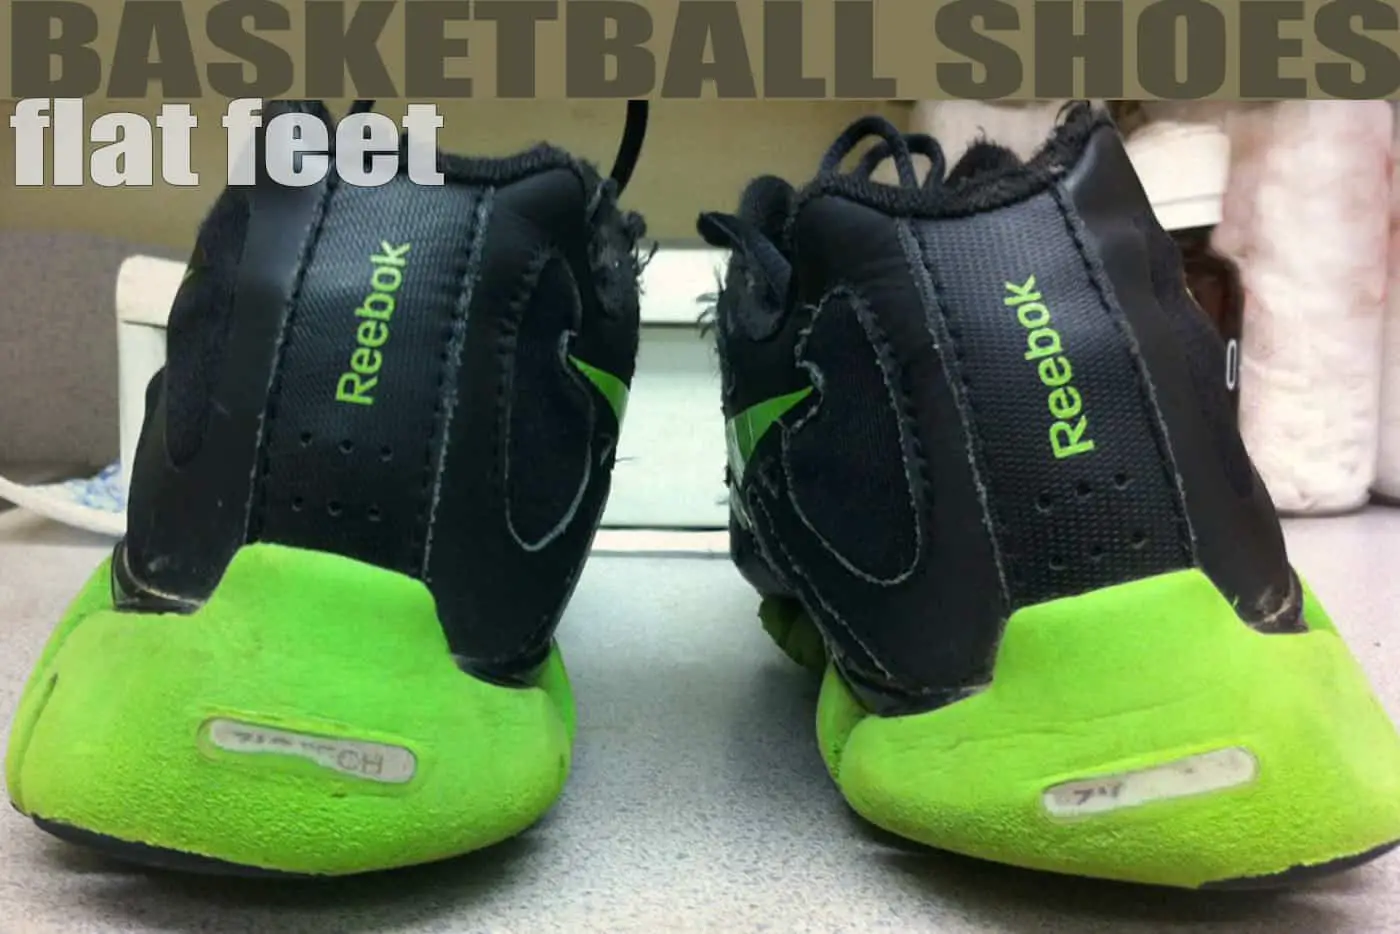 Best Basketball Shoes for Flat Feet 